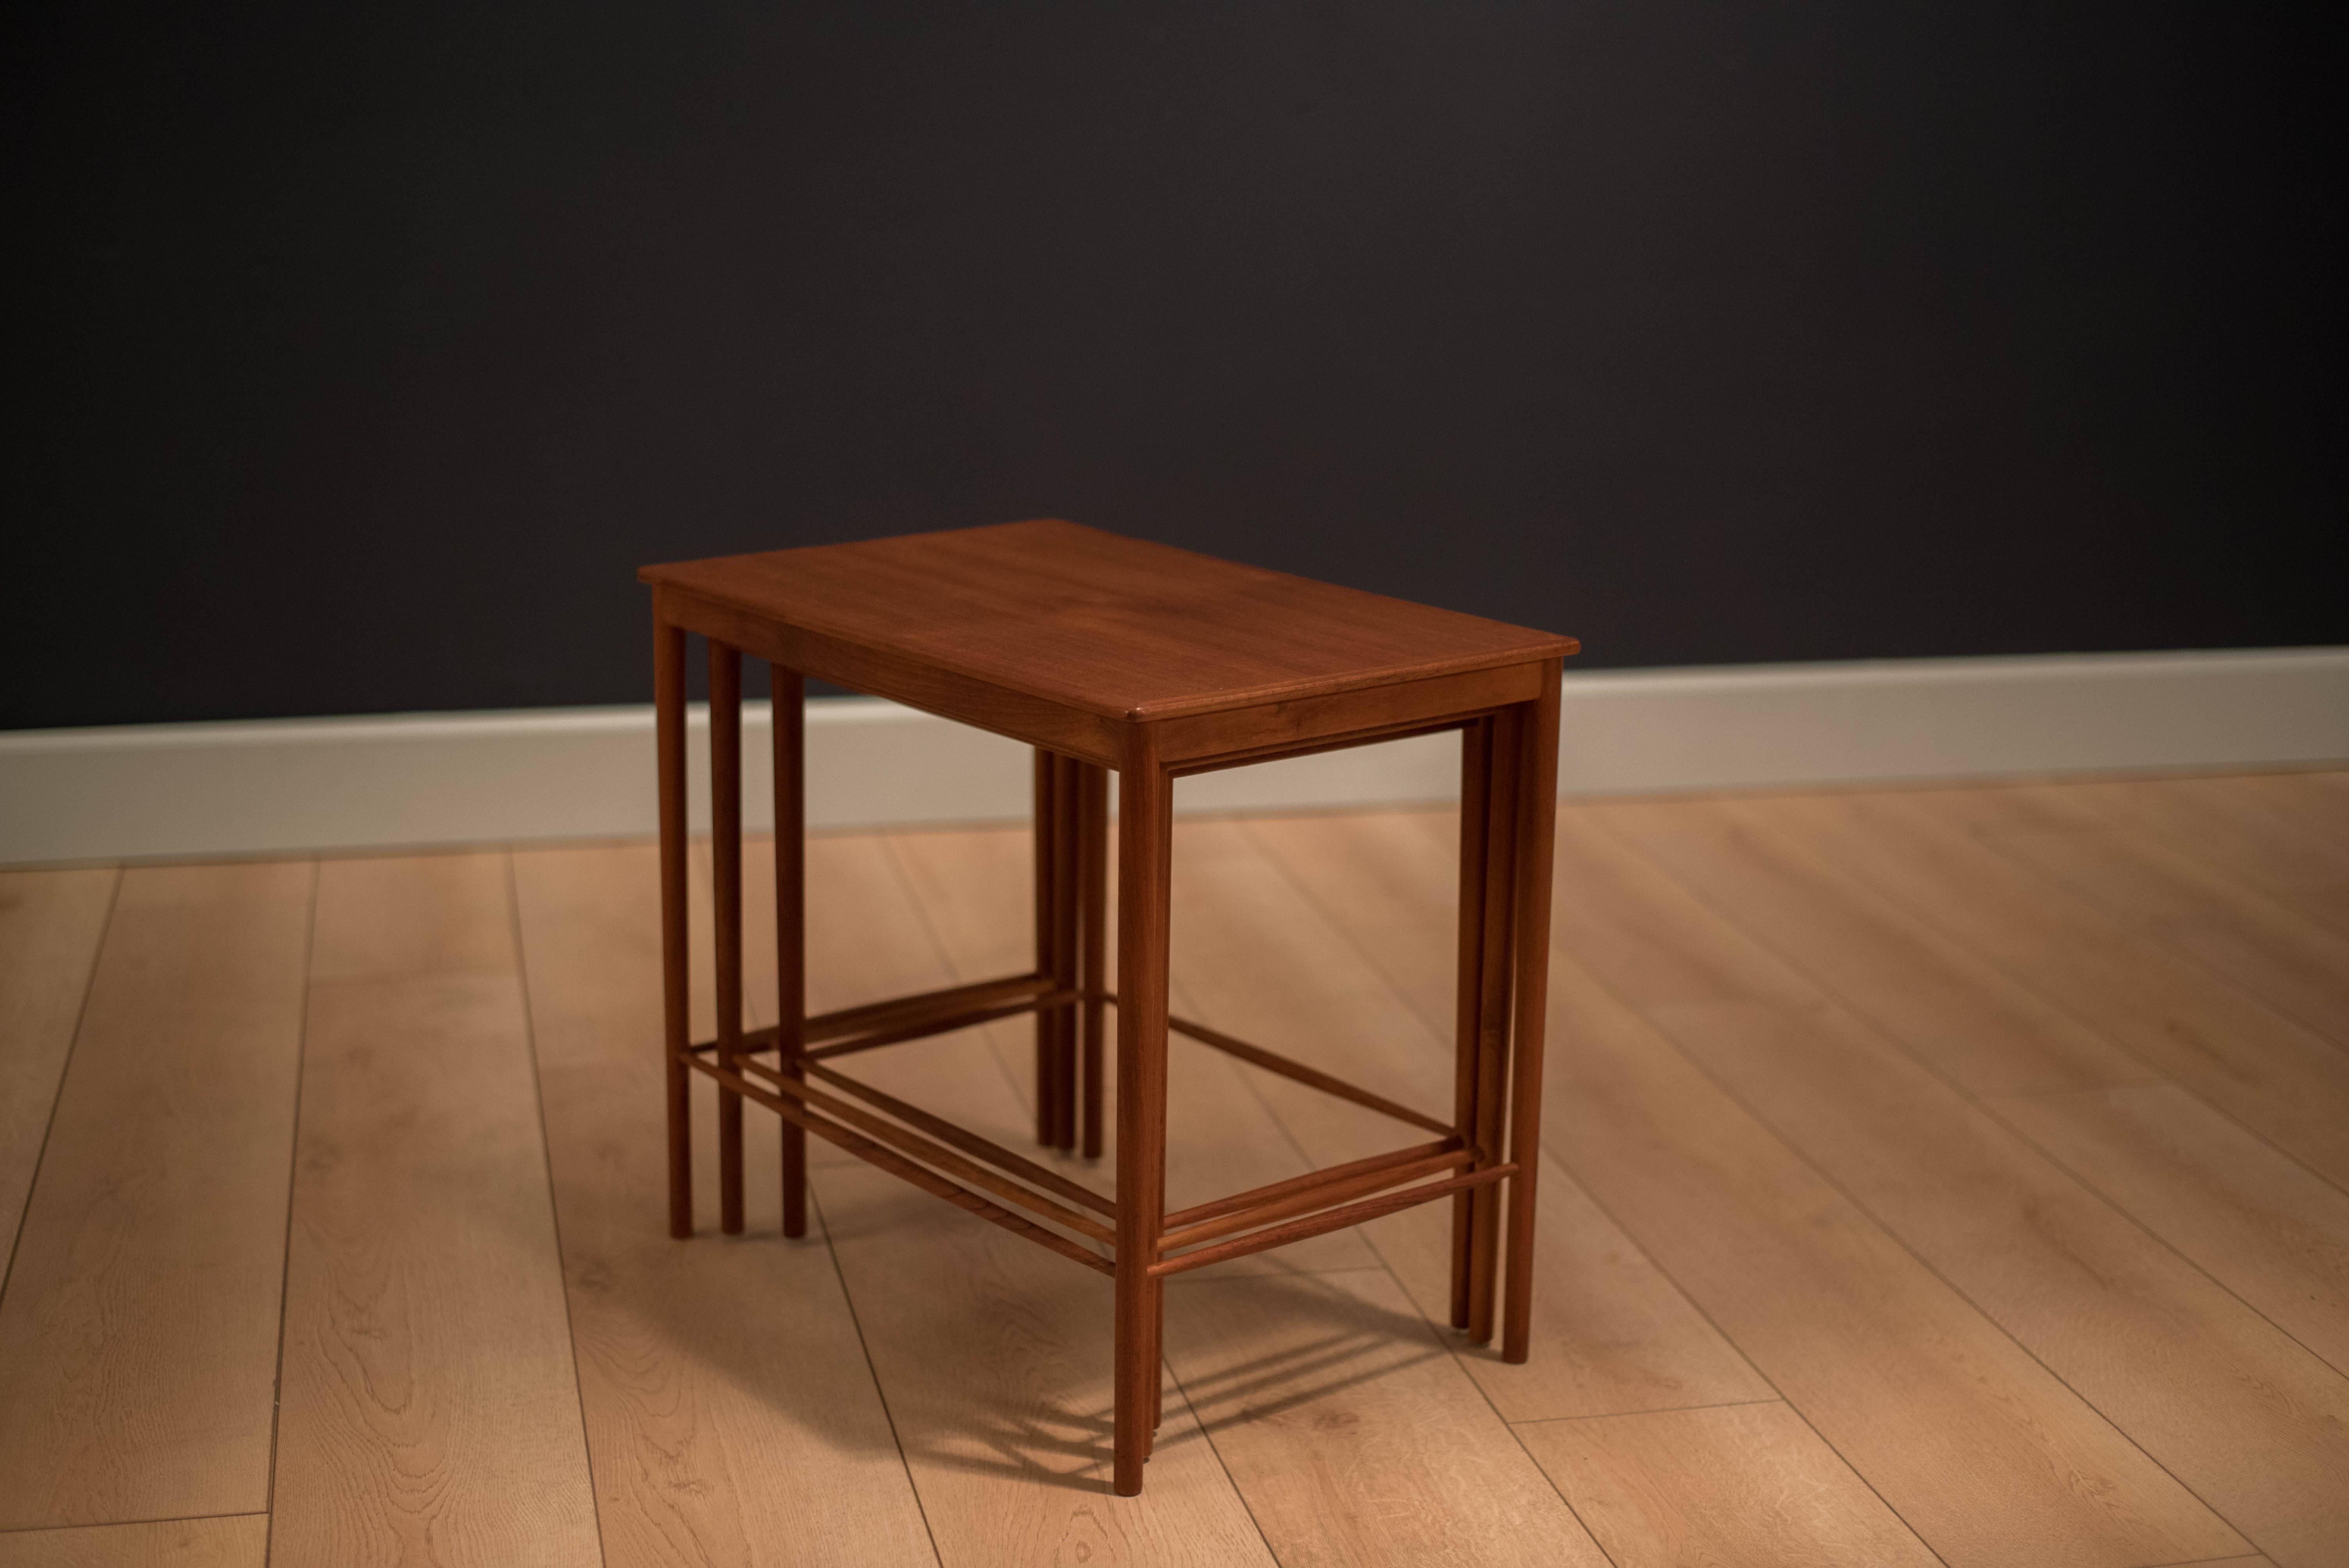 Danish modern teak nesting tables by Ole Wanscher for PP Jeppesen. This set includes three stacking tables and is perfect for any small space.

     